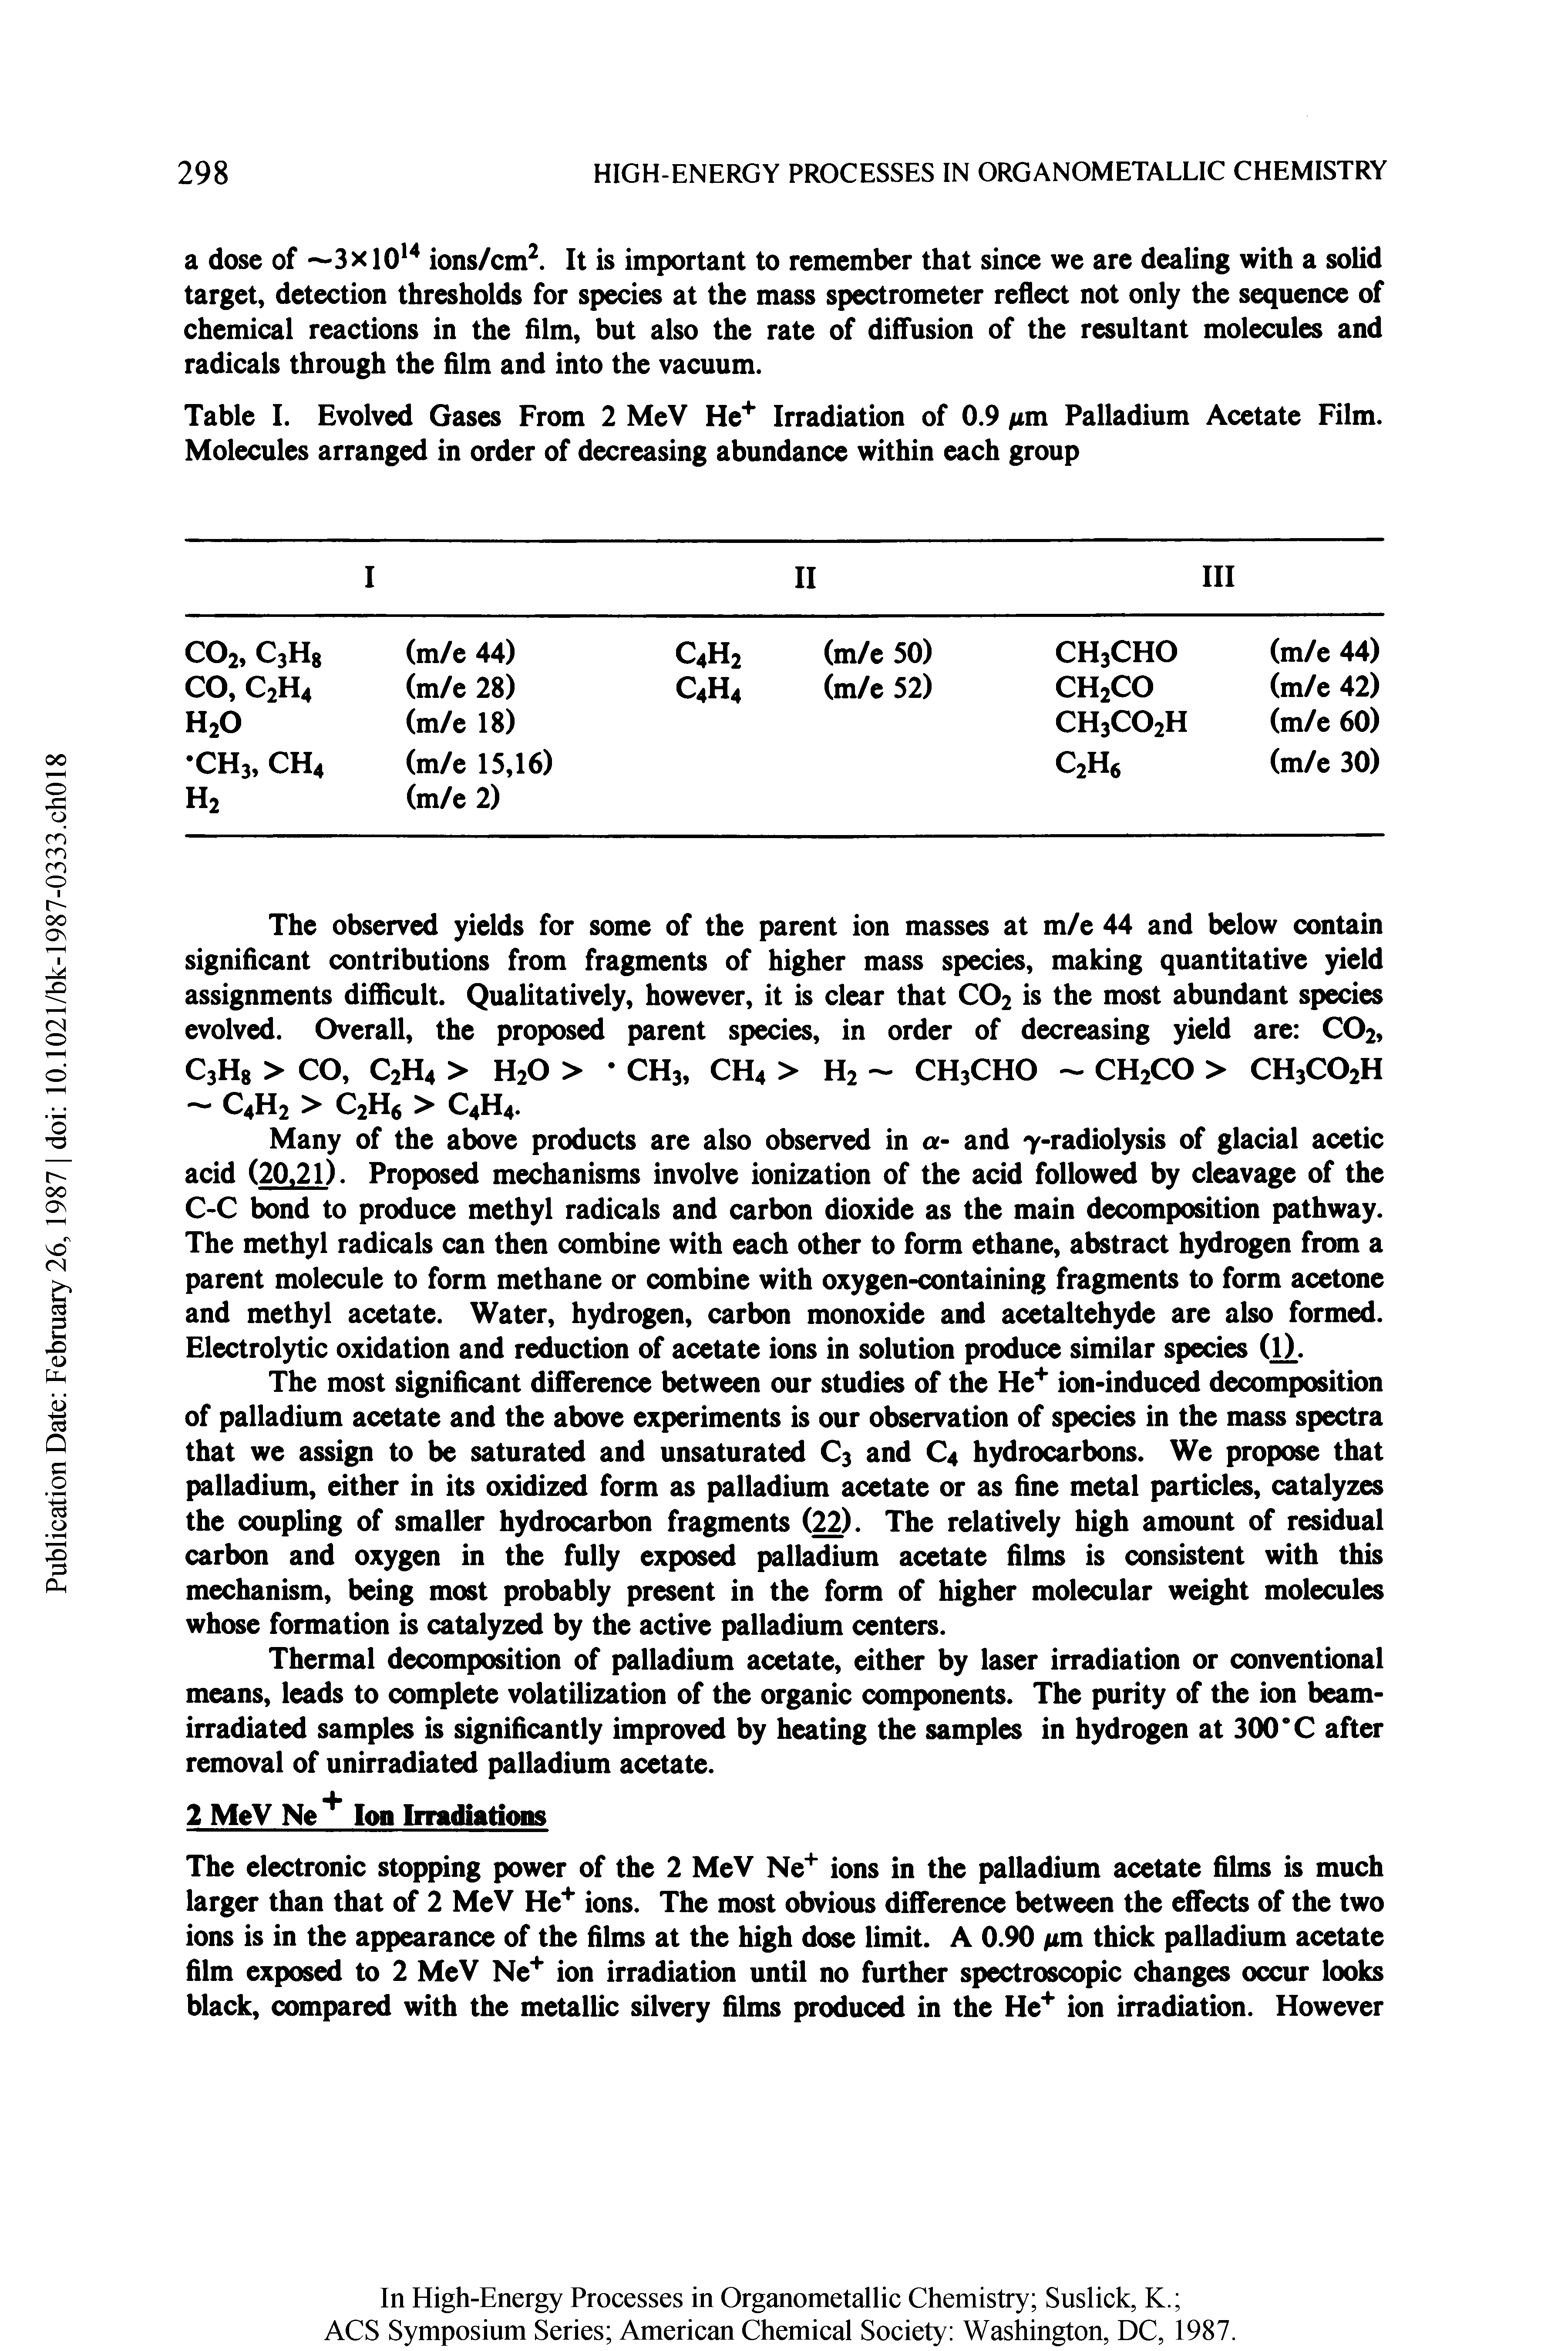 Table I. Evolved Gases From 2 MeV He+ Irradiation of 0.9 nm Palladium Acetate Film. Molecules arranged in order of decreasing abundance within each group...